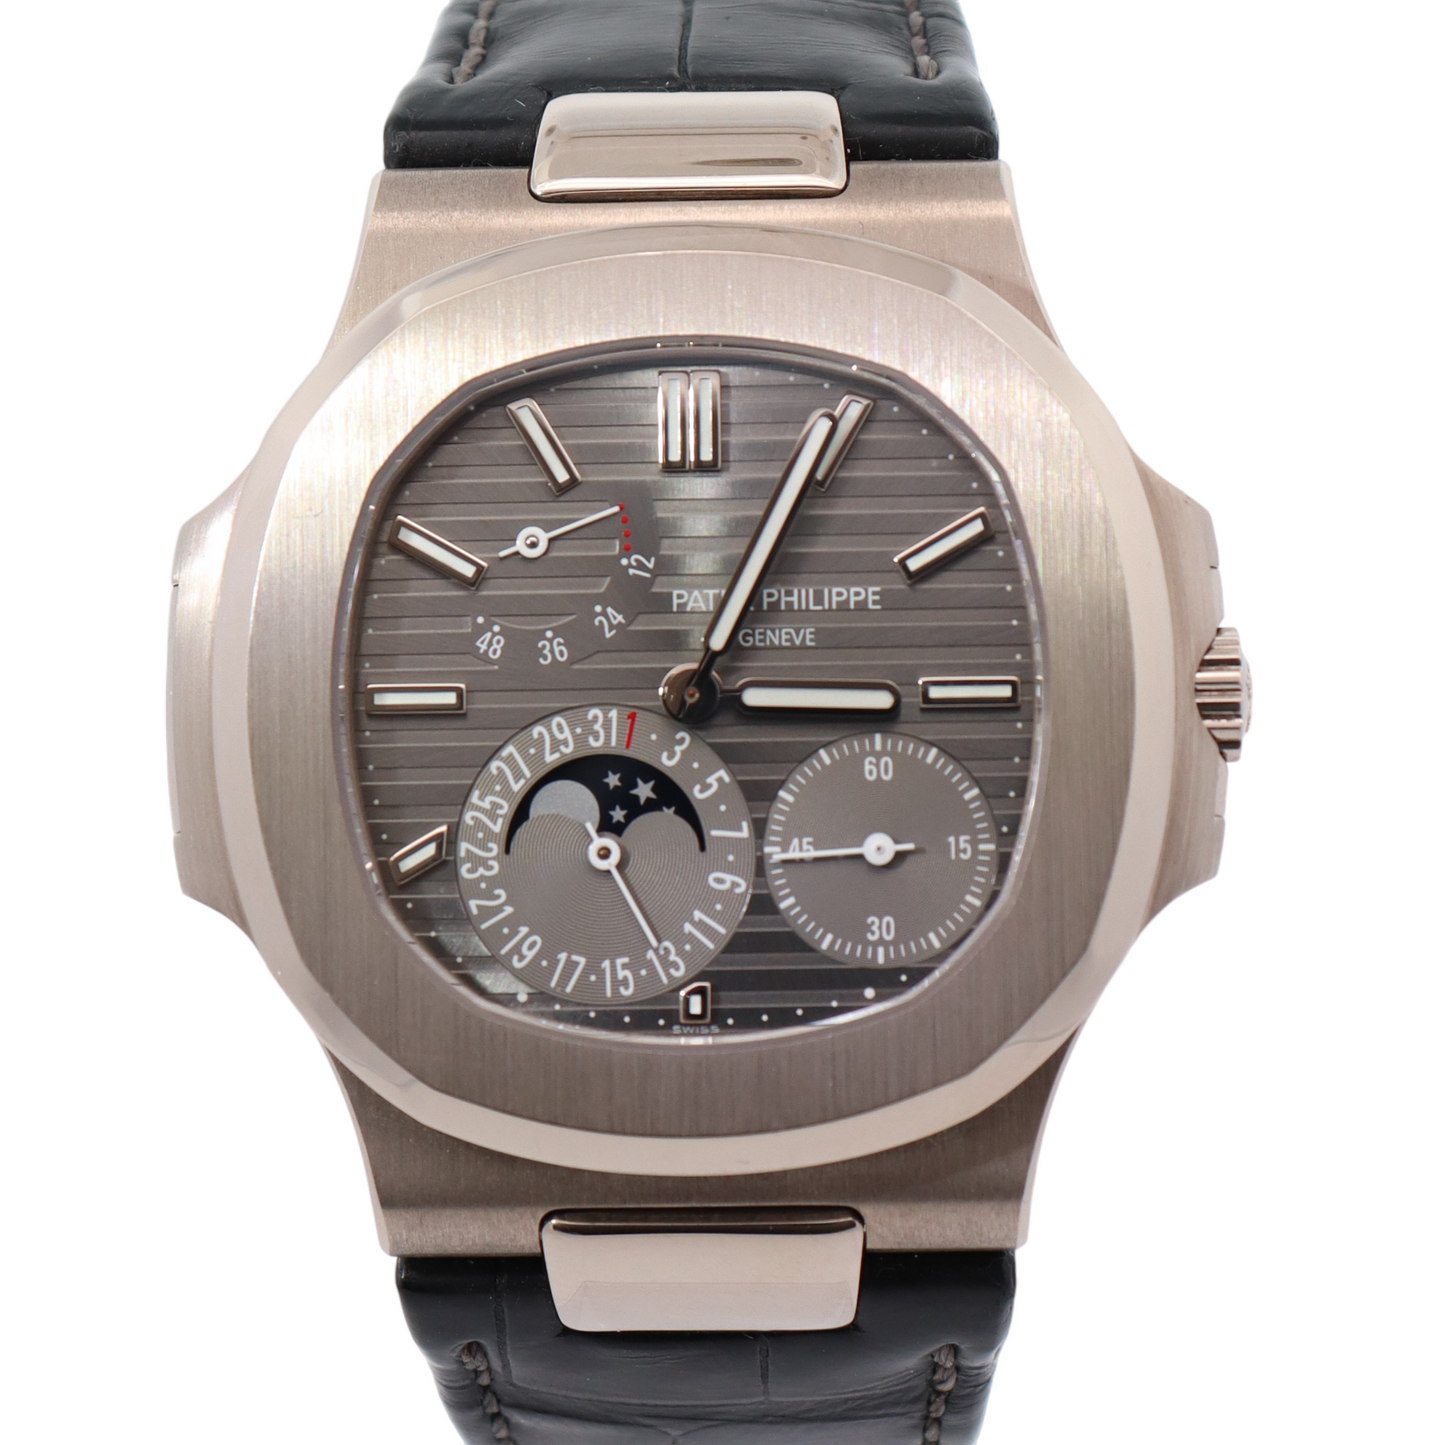 Patek Philippe Moon Phases White Gold 40mm Gray Chronograph Dial Watch Reference#: 5712G-001 - Happy Jewelers Fine Jewelry Lifetime Warranty